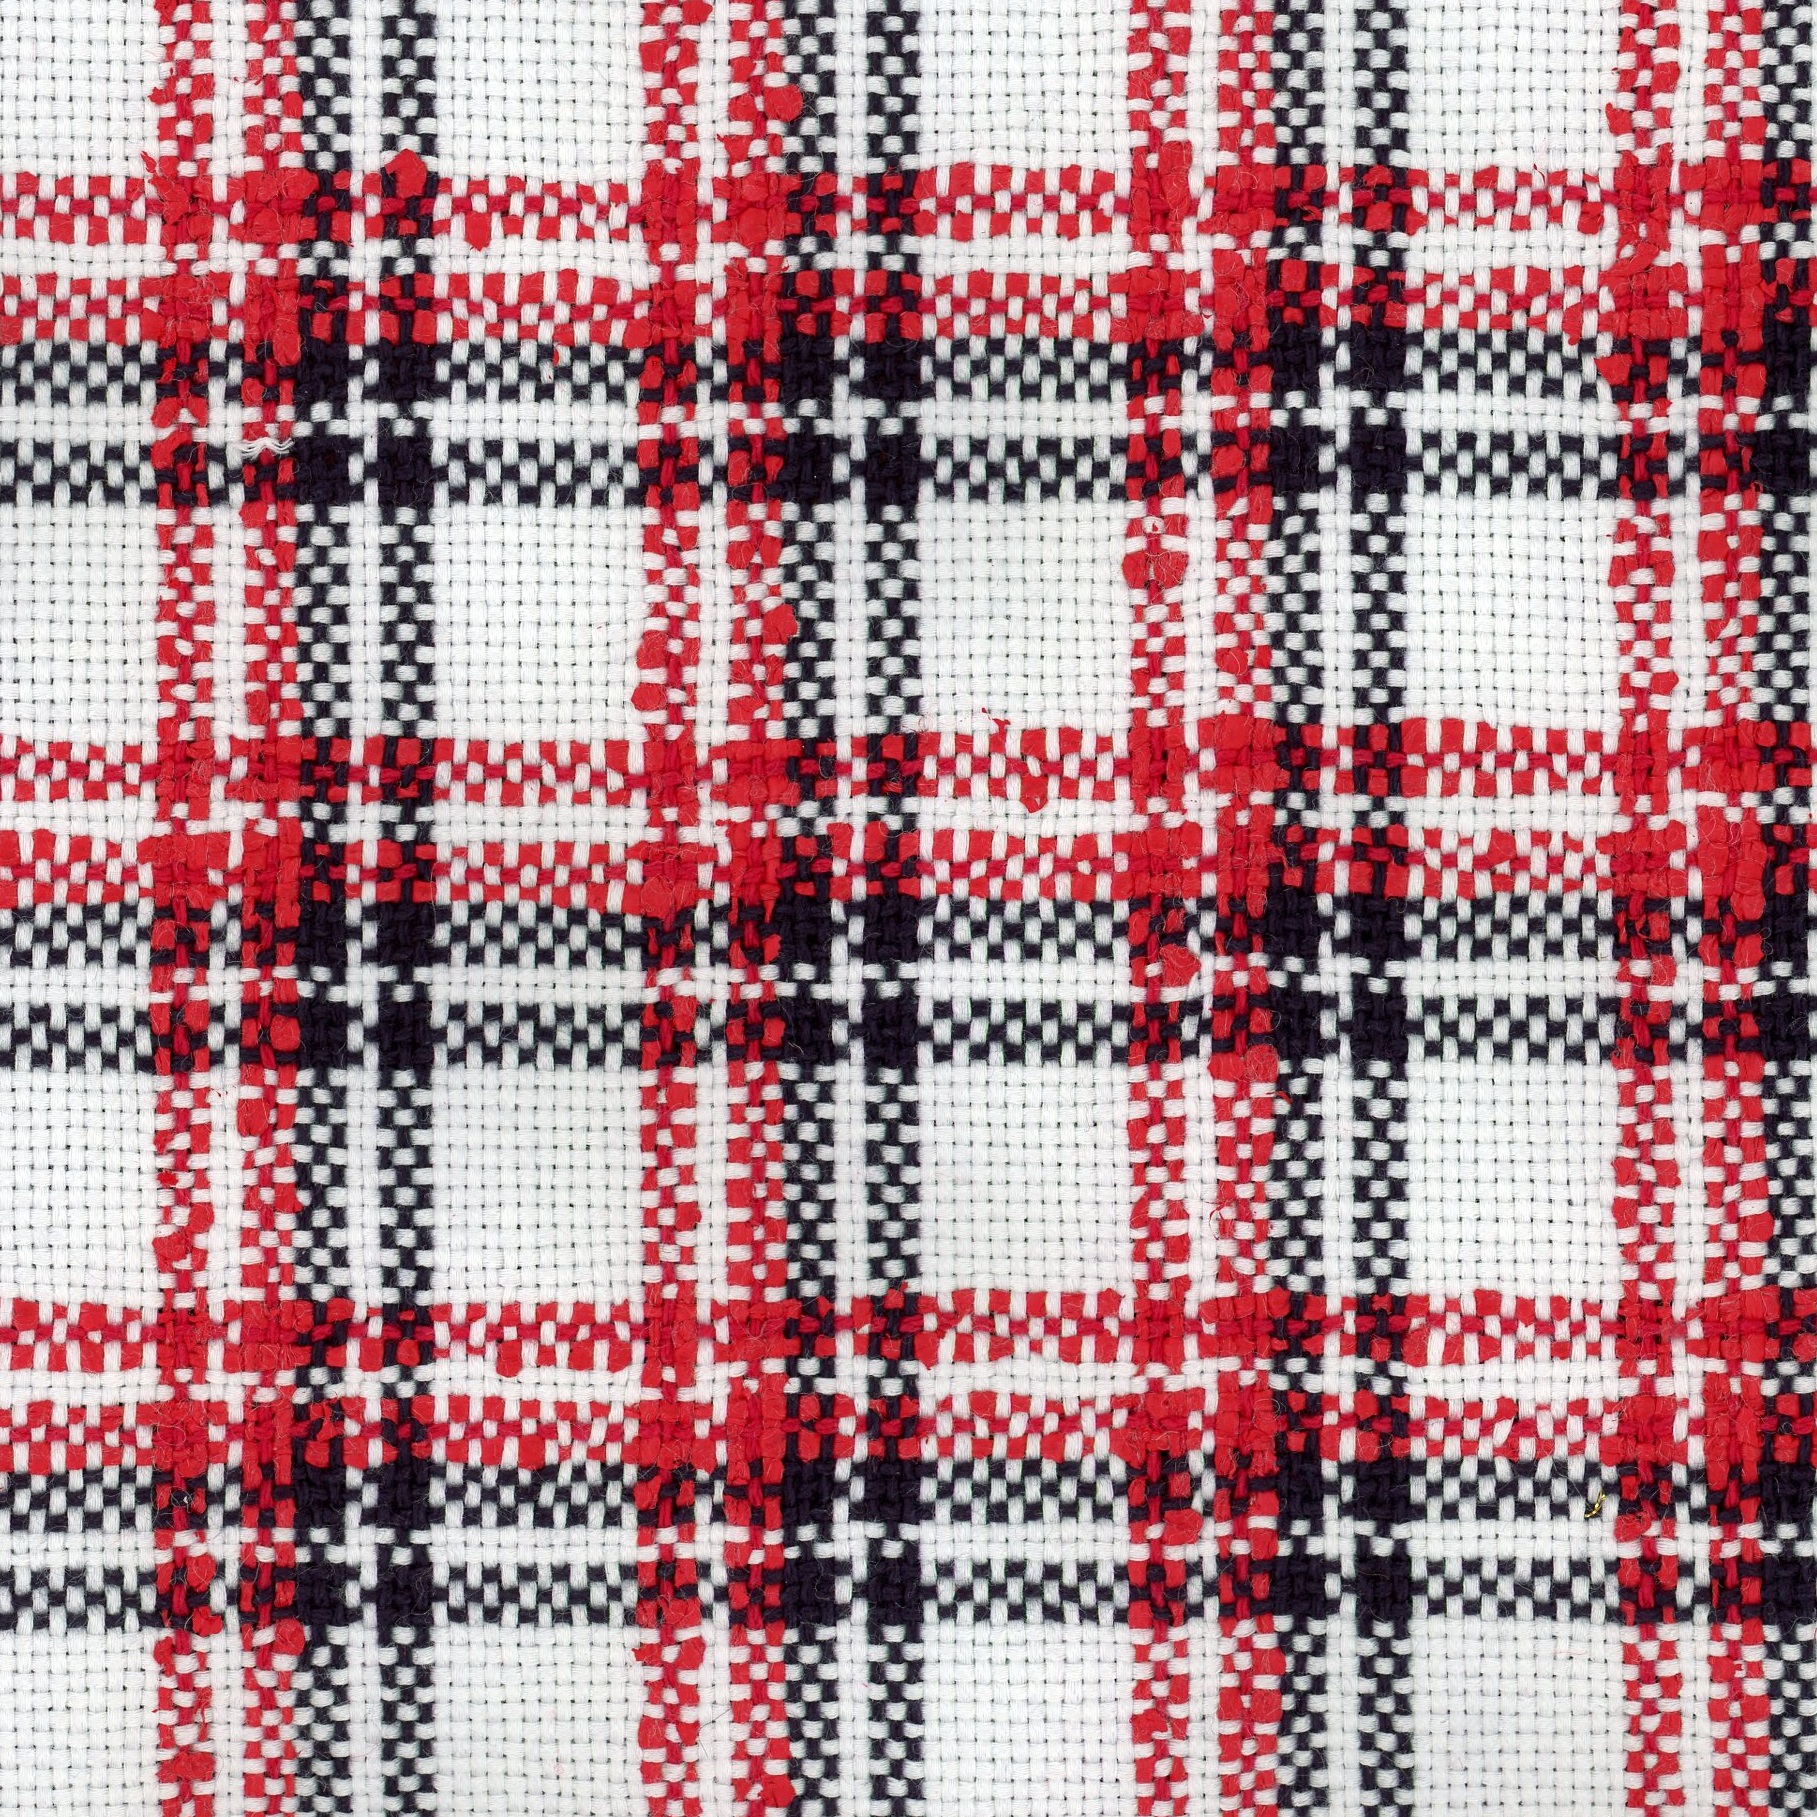 Z30194 – Red White and Black Check Fabric | LINTON DIRECT